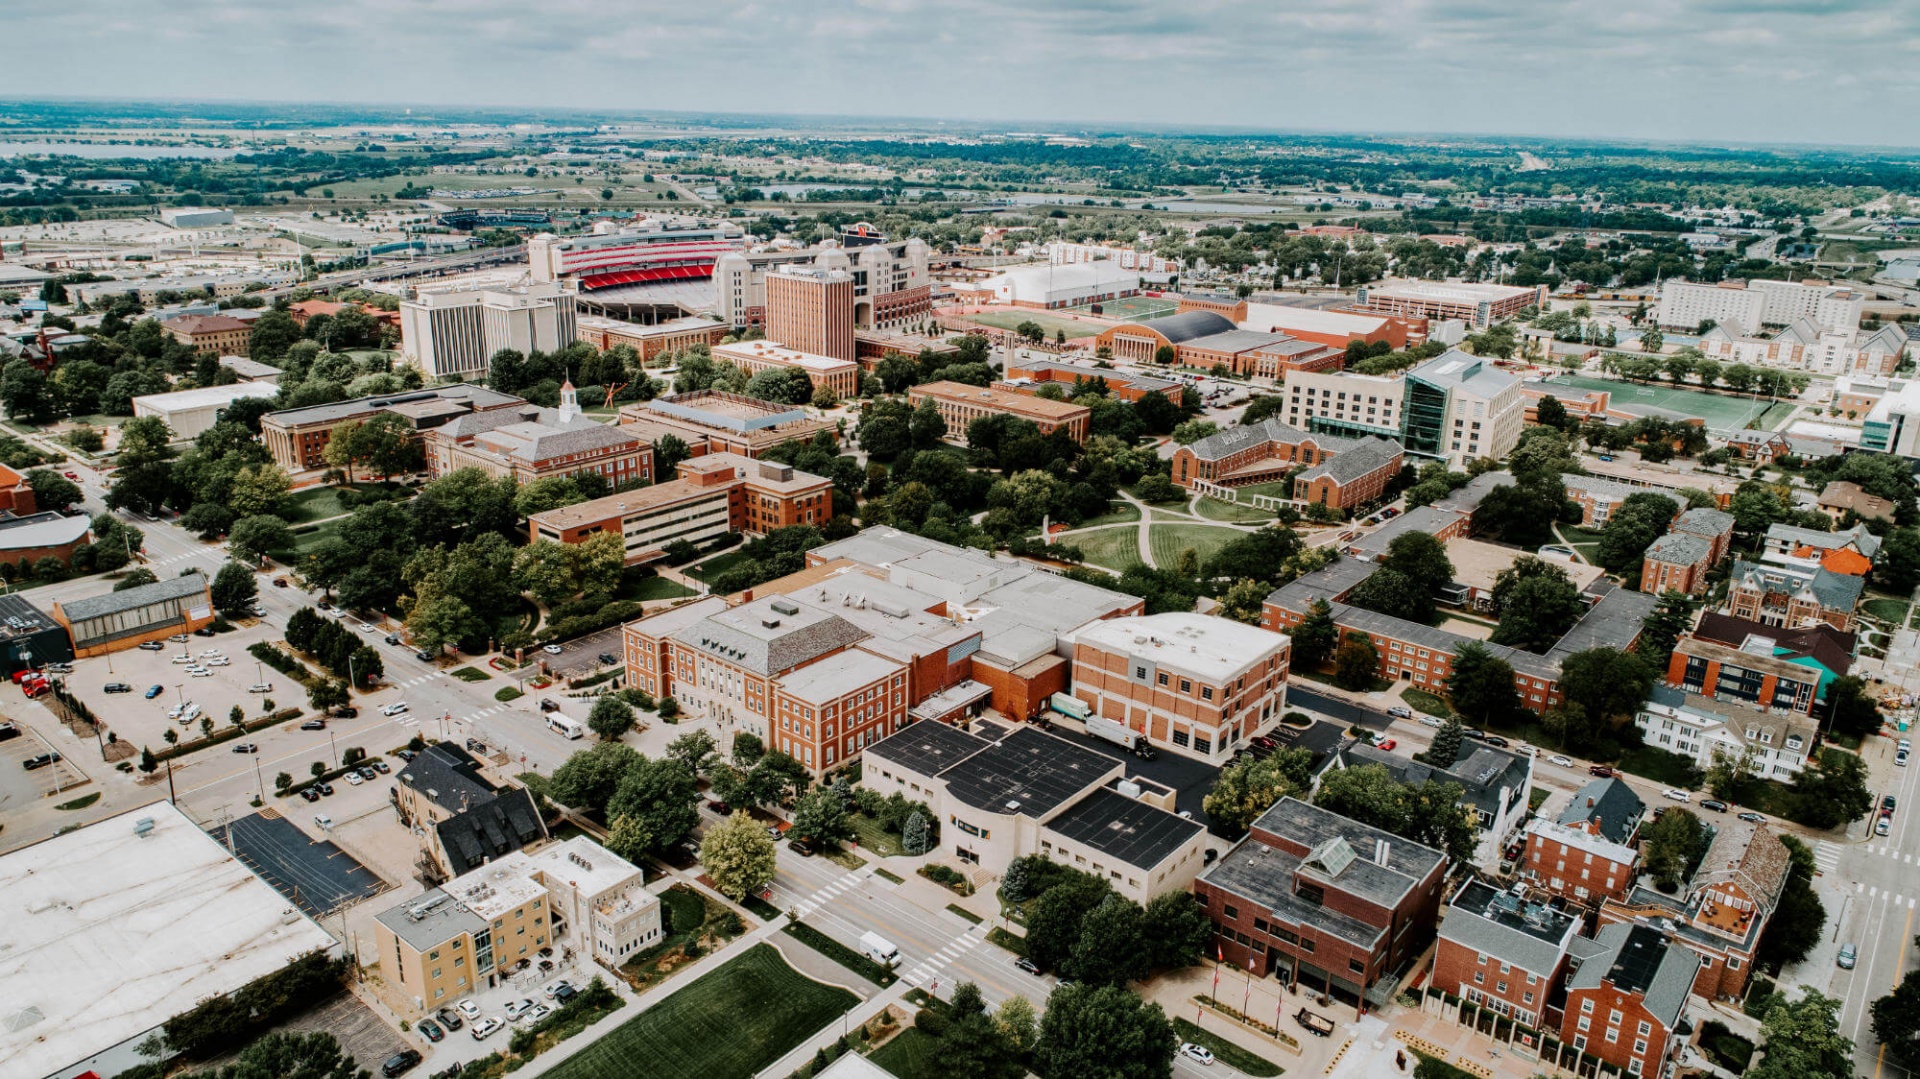 Overhead view of campus buildings